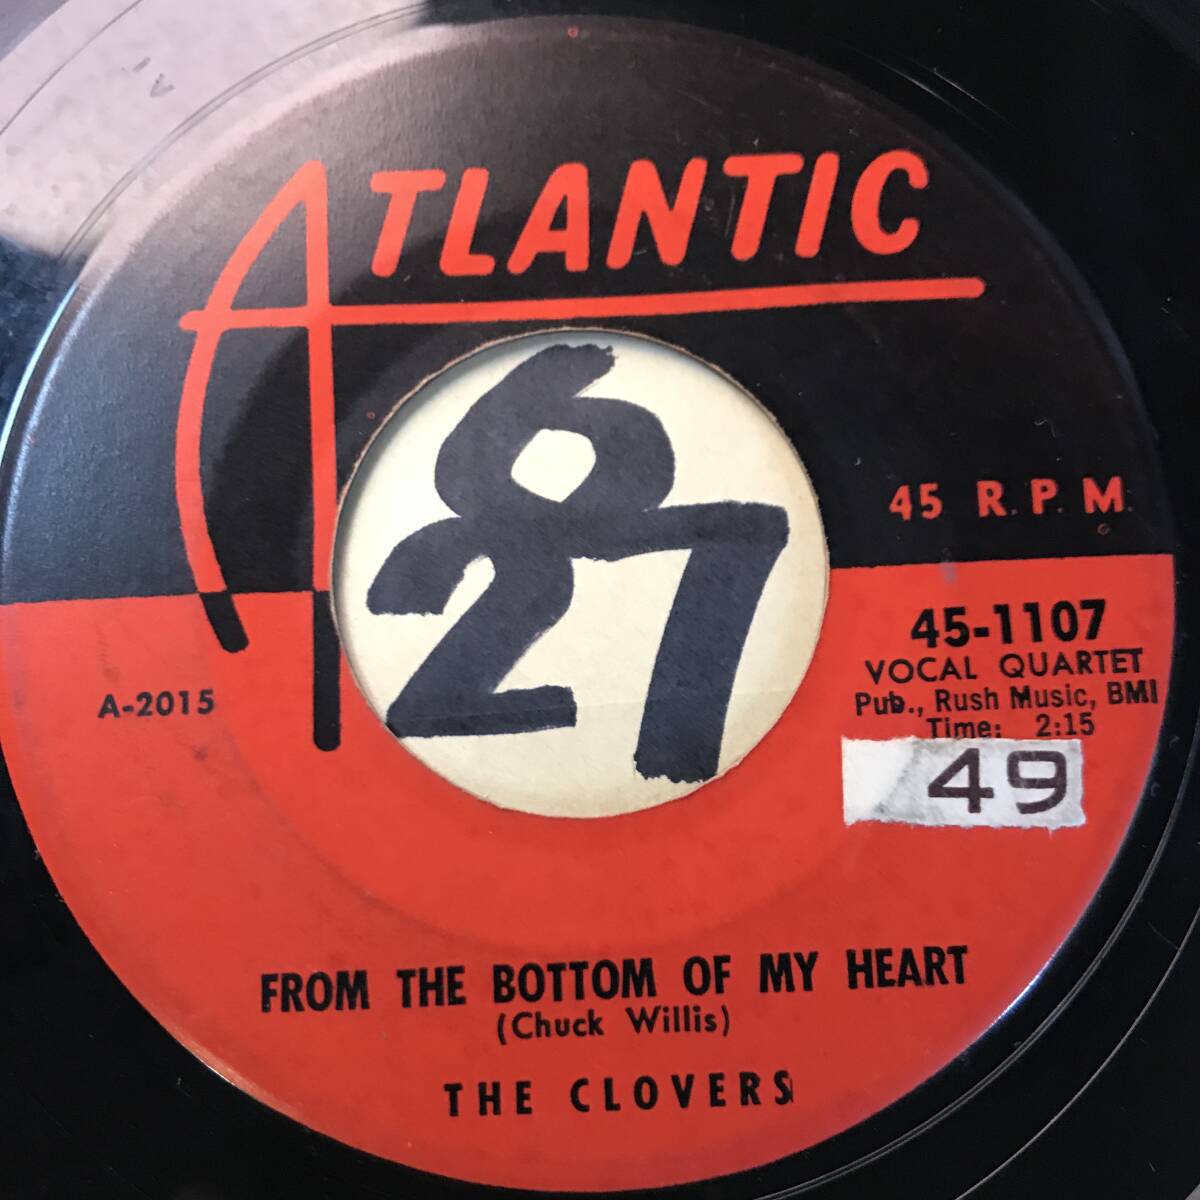  audition THE CLOVERS FROM THE BOTTOM OF MY HEART both sides VG++ SOUNDS EX+